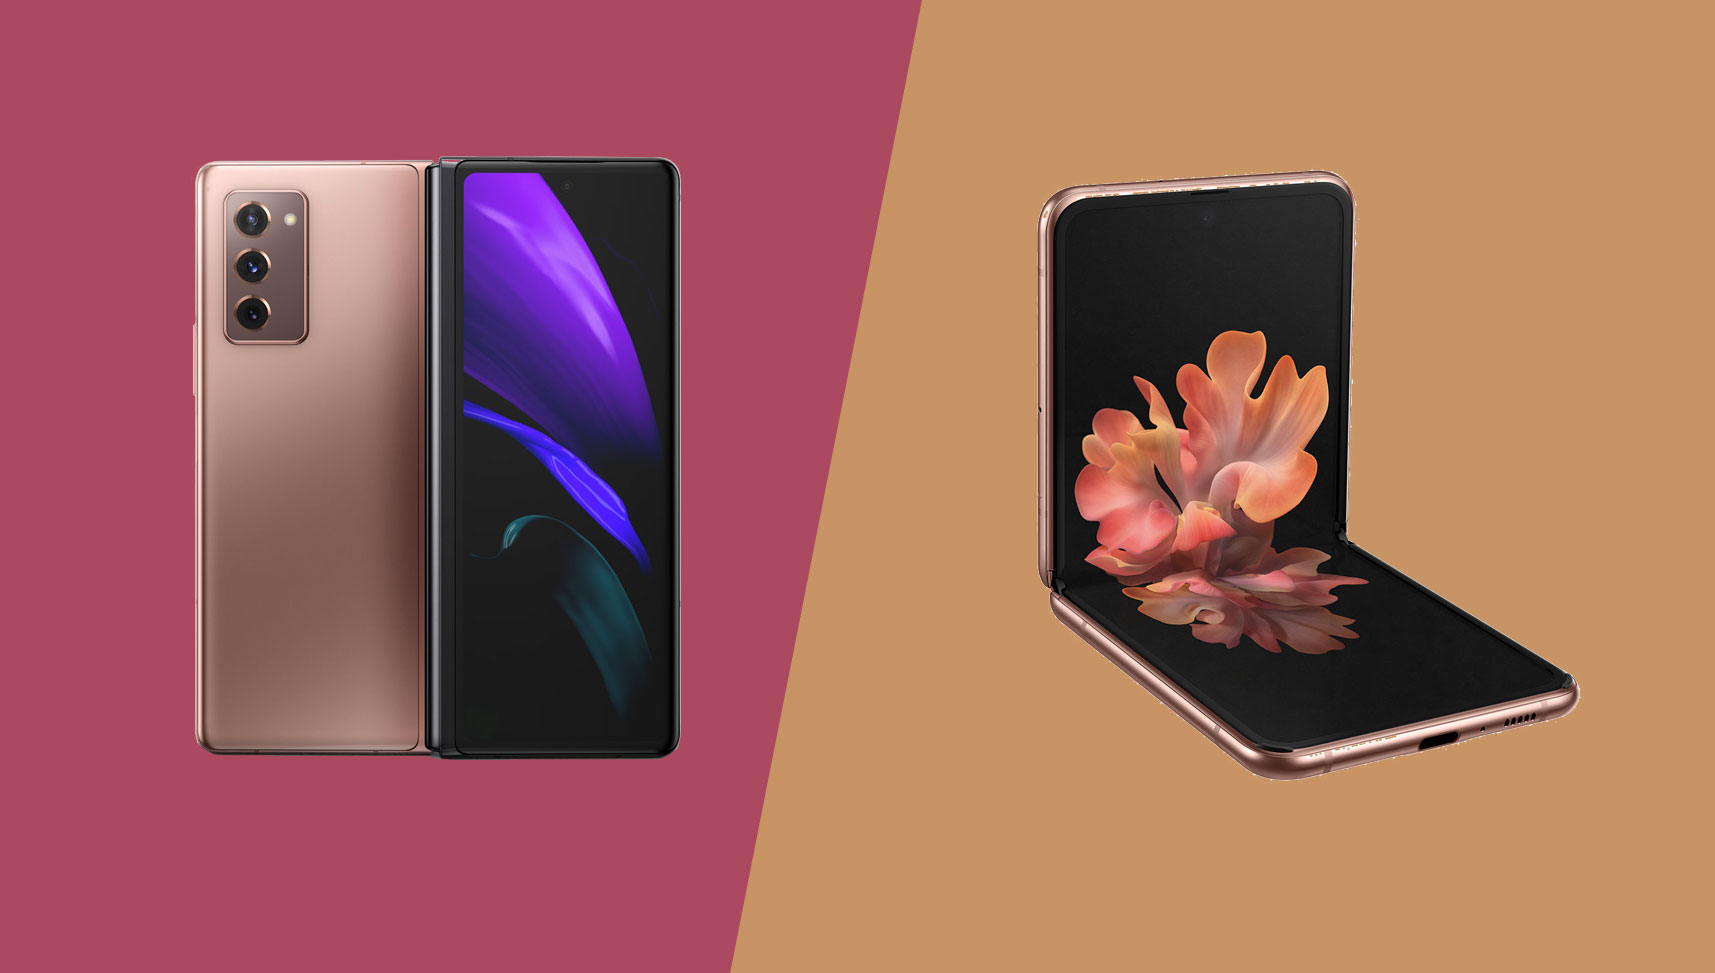 Samsung Flip vs Fold, What's The Best Fold Phone For You?